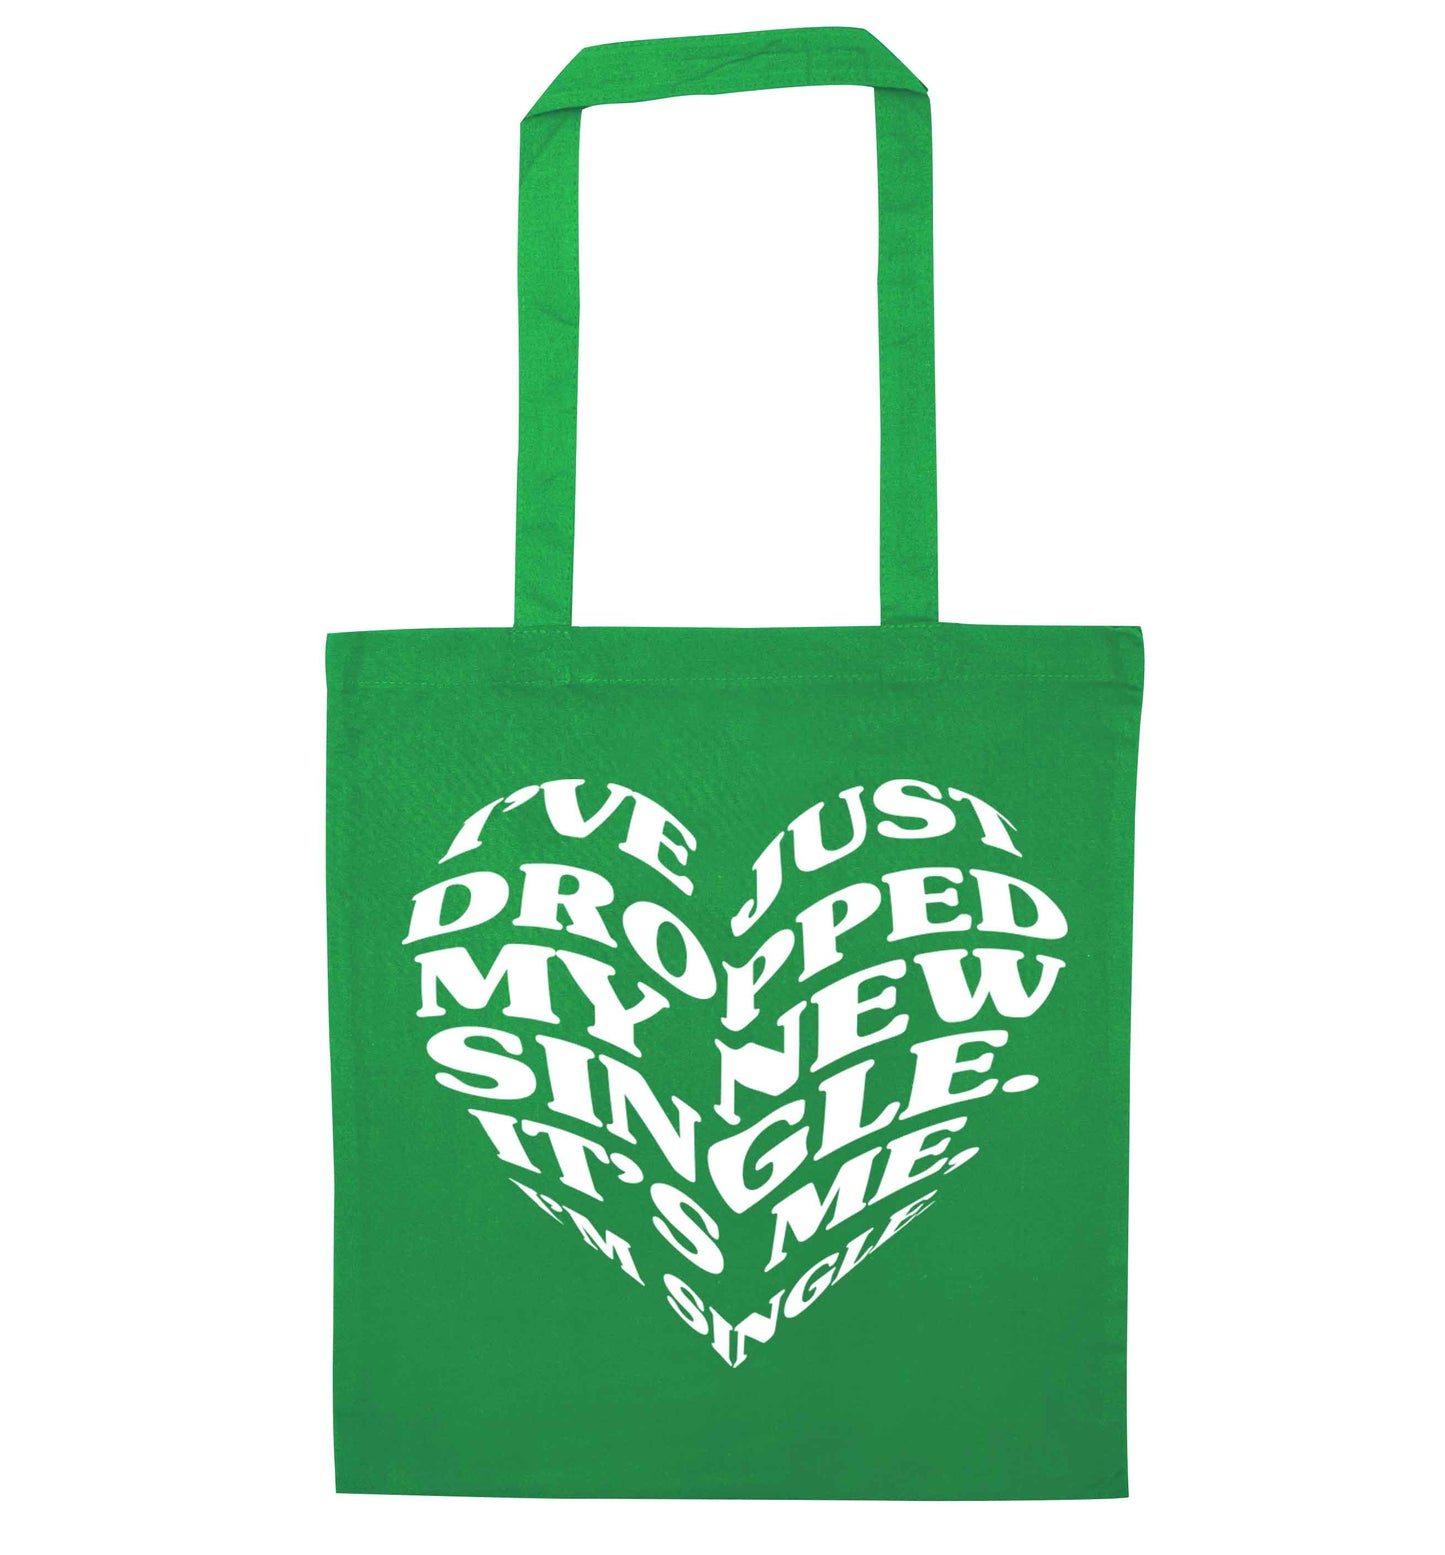 I've just dropped my new single it's me I'm single green tote bag